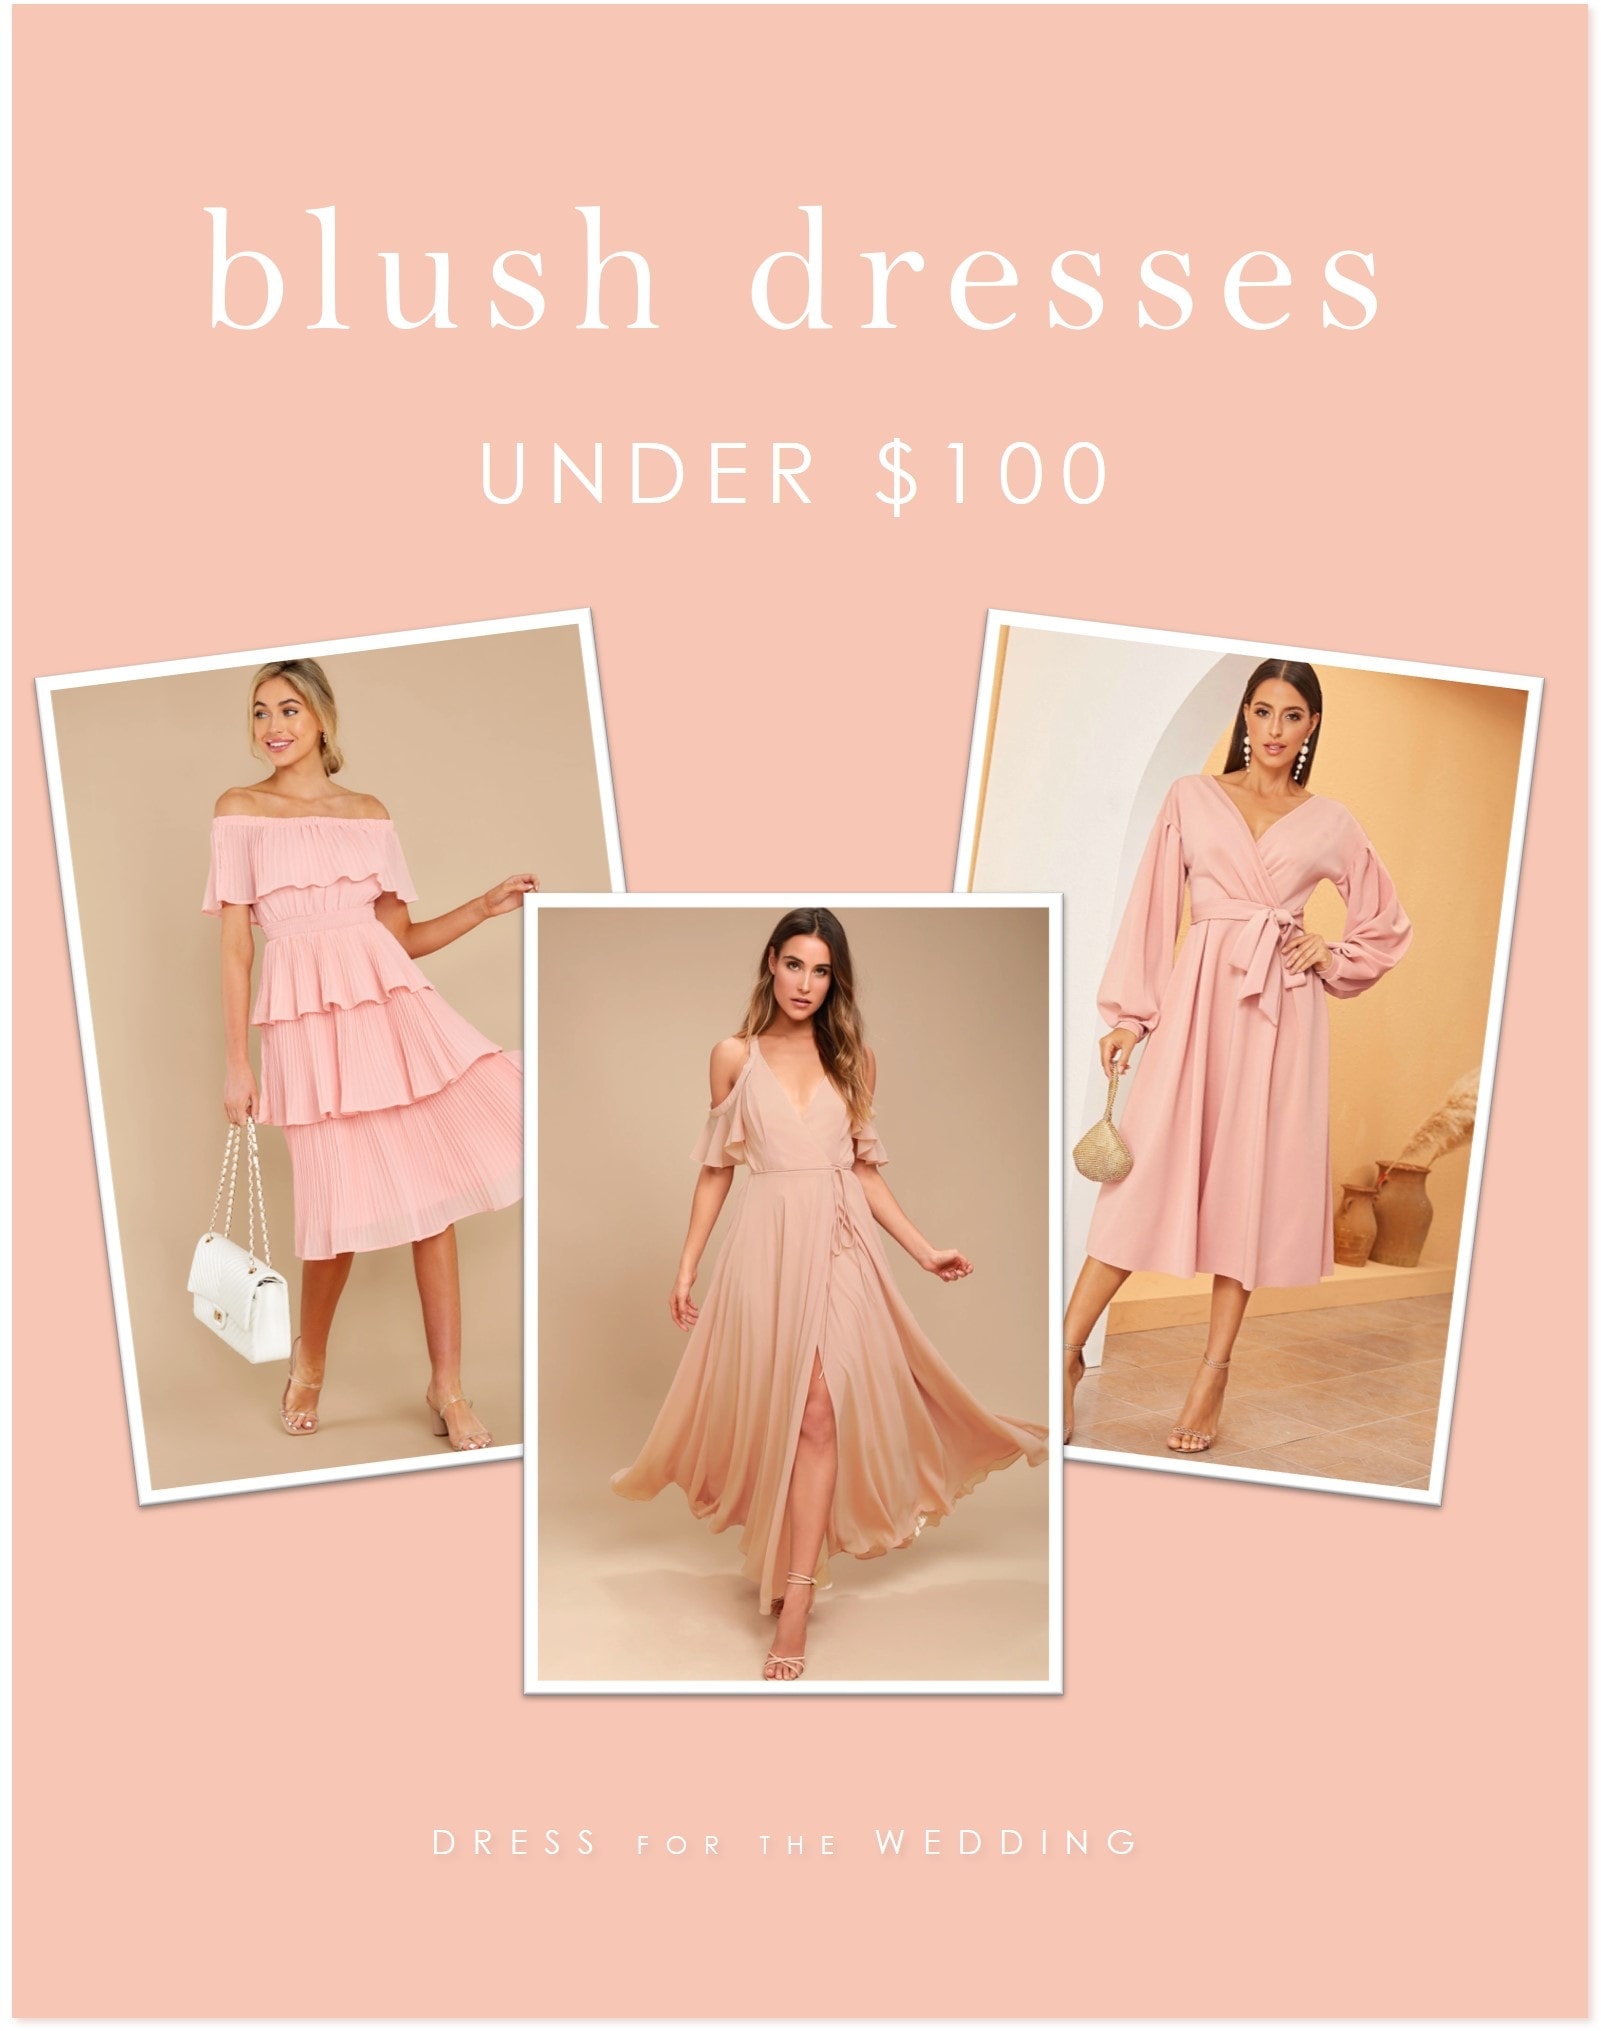 Blush Dresses for a Wedding Under $100 - Dress for the Wedding